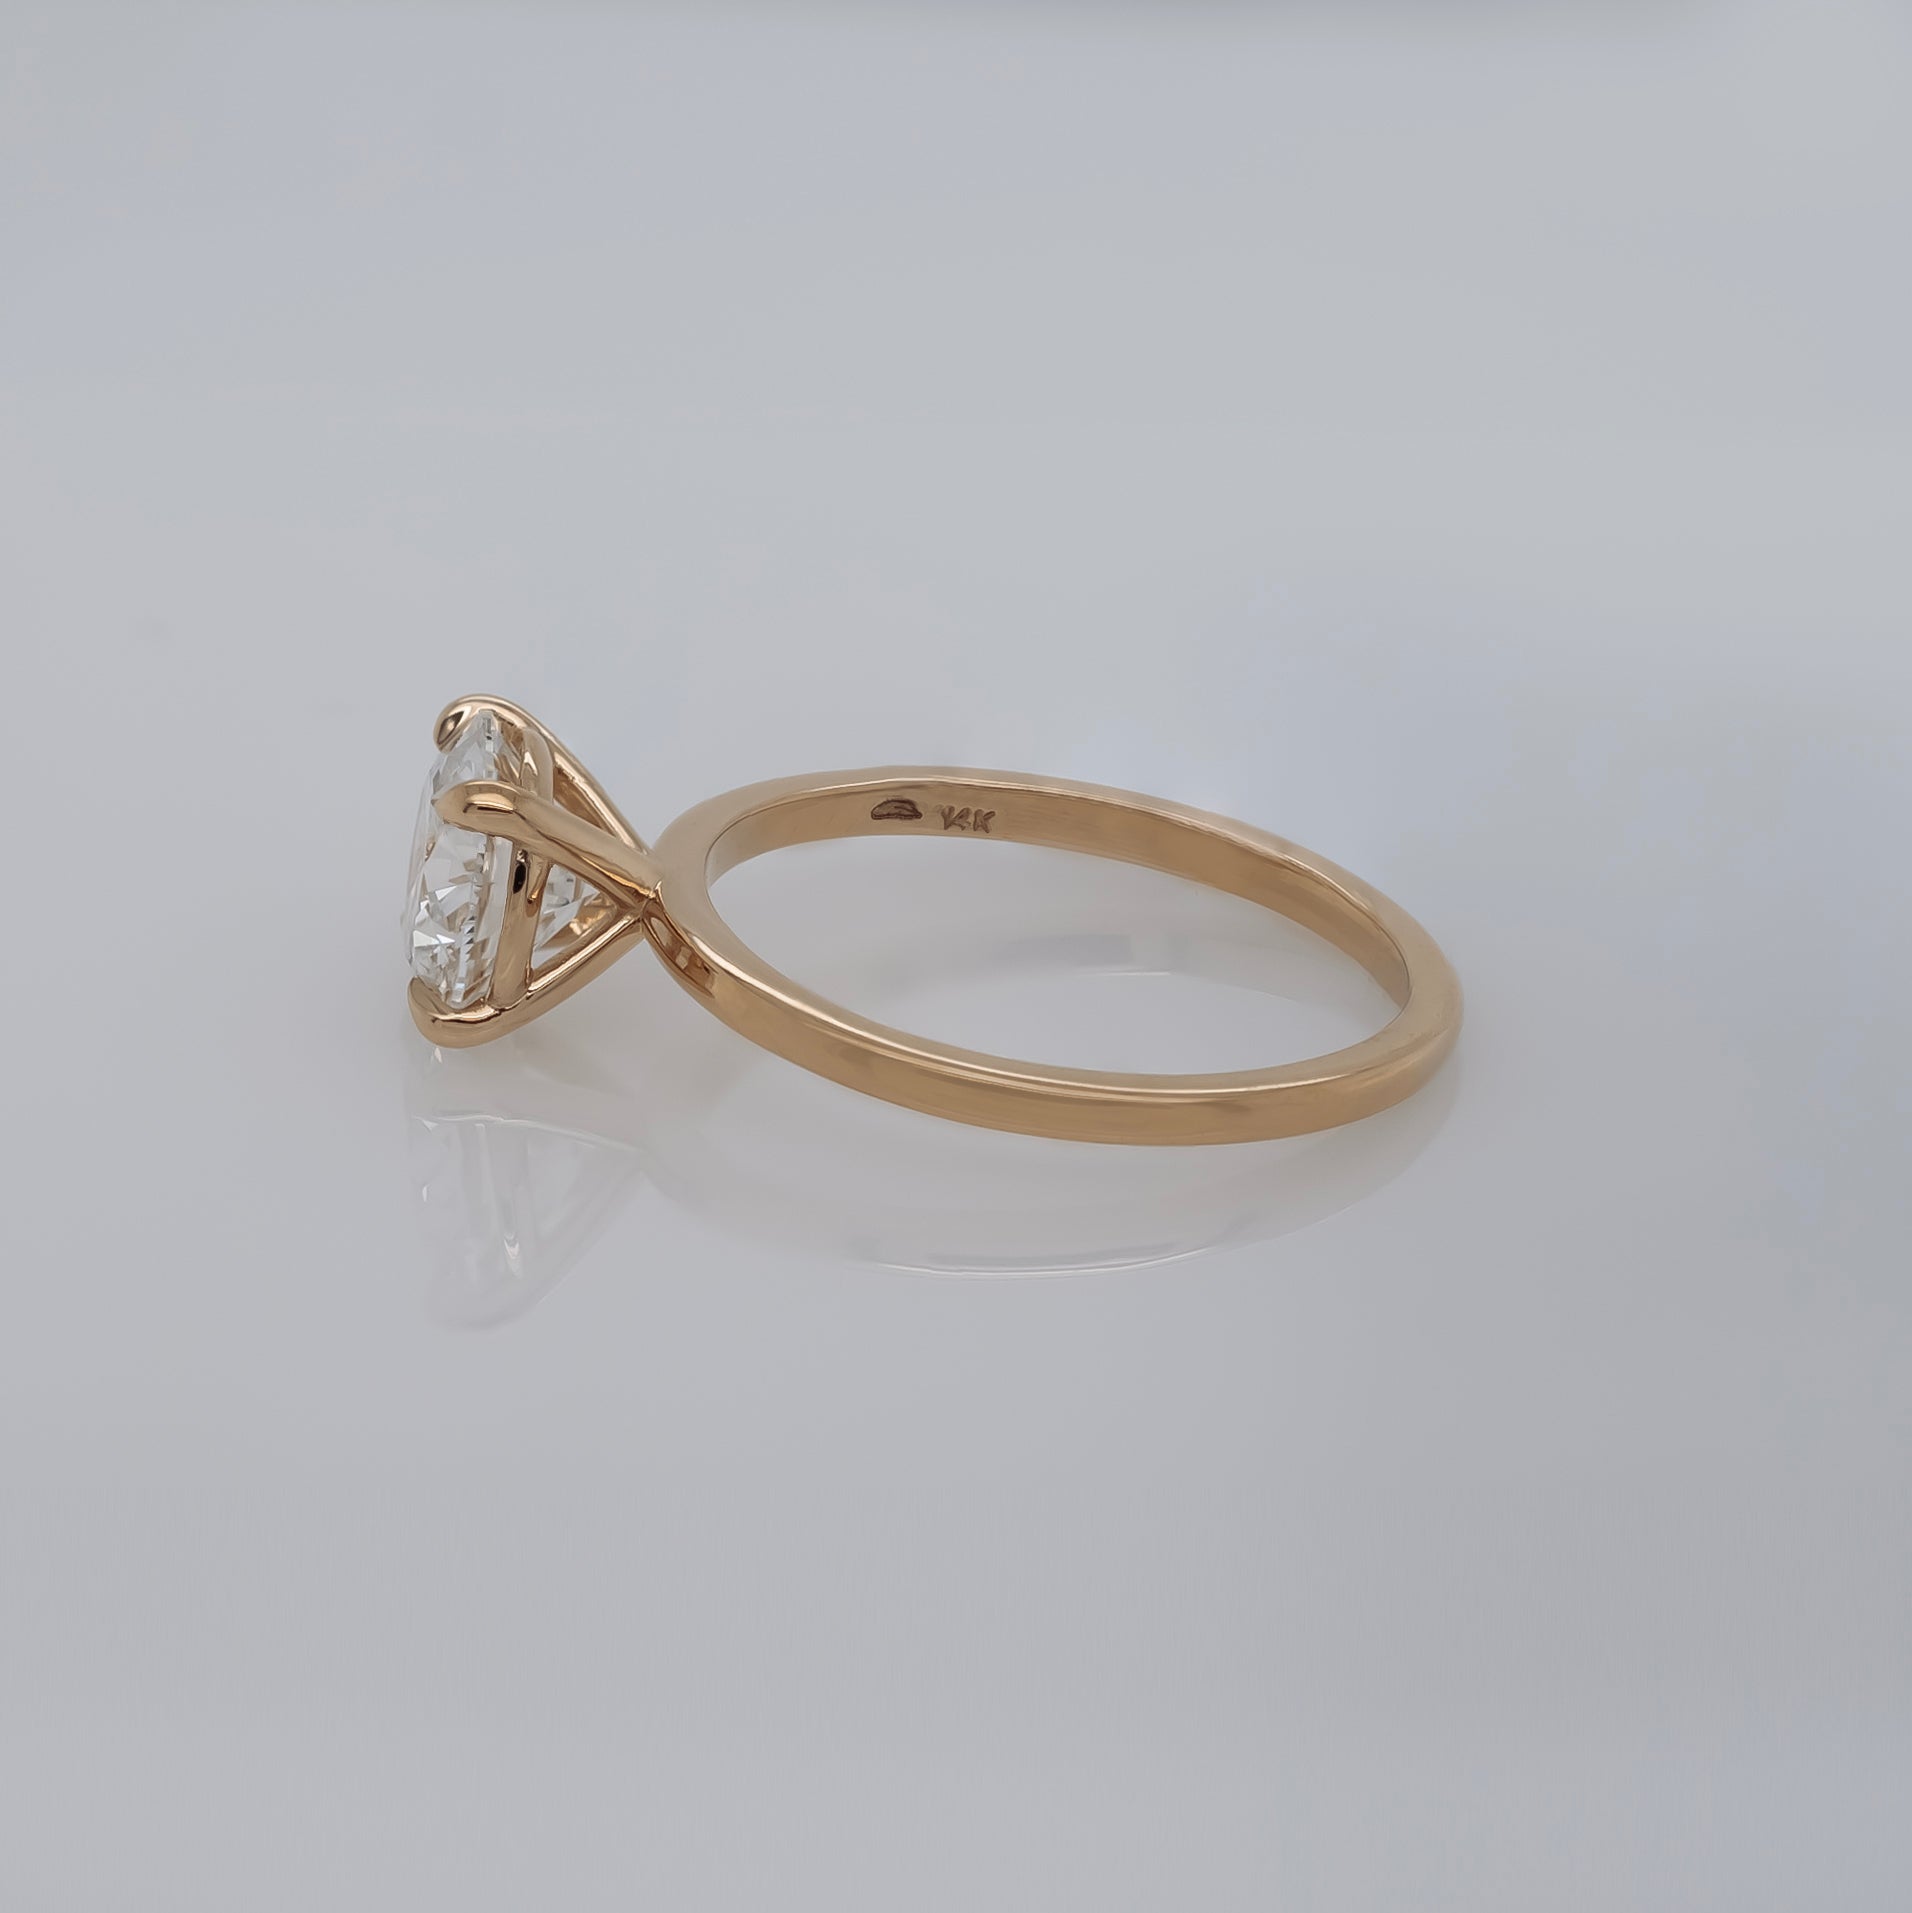 1.5ct Lab-Grown Diamond Solitaire Engagement Ring | Magpie Jewellery